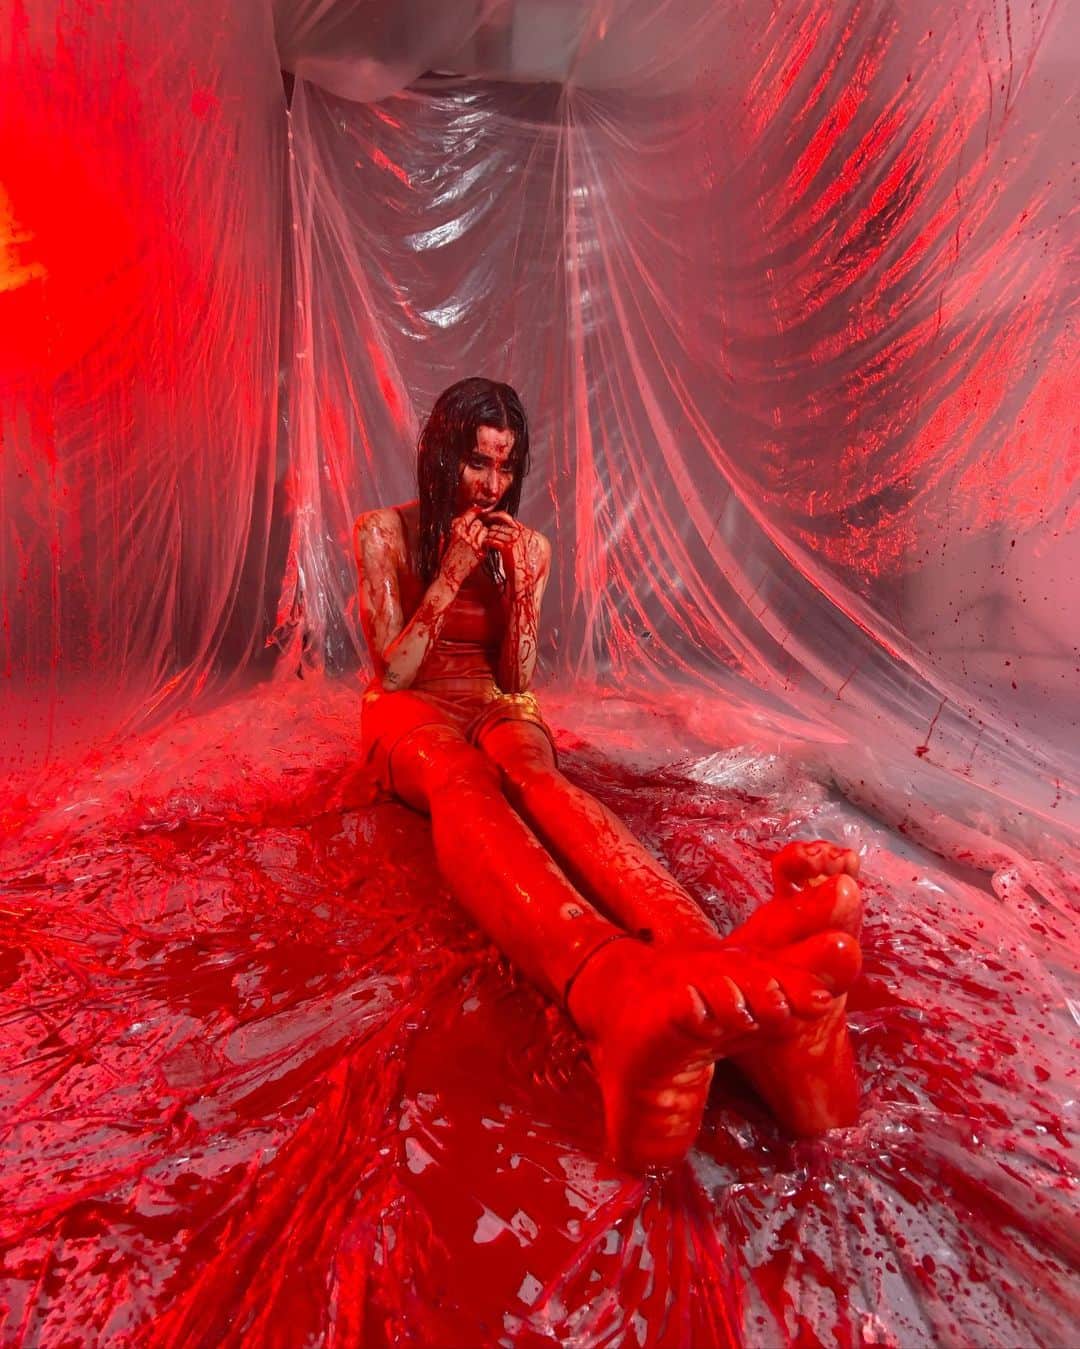 Greta Menchiのインスタグラム：「type of stuff that i love - so much fun casually shooting -this a night -I think it was June. One of my biggest secret dreams since I was a child was to be casted for sum horror project. I’m wildly manifesting this for me 🕹️ ⚠️FAKE BLOOD⚠️ (@giuliocafasso was right got banned 2 times for this post ❌❌❌) ps. What’s your biggest trigger? Mine is being called “amore” “tesoro” “ciccia” “tata” ecc literally cannot stand it. What’s yours? I wanna know」